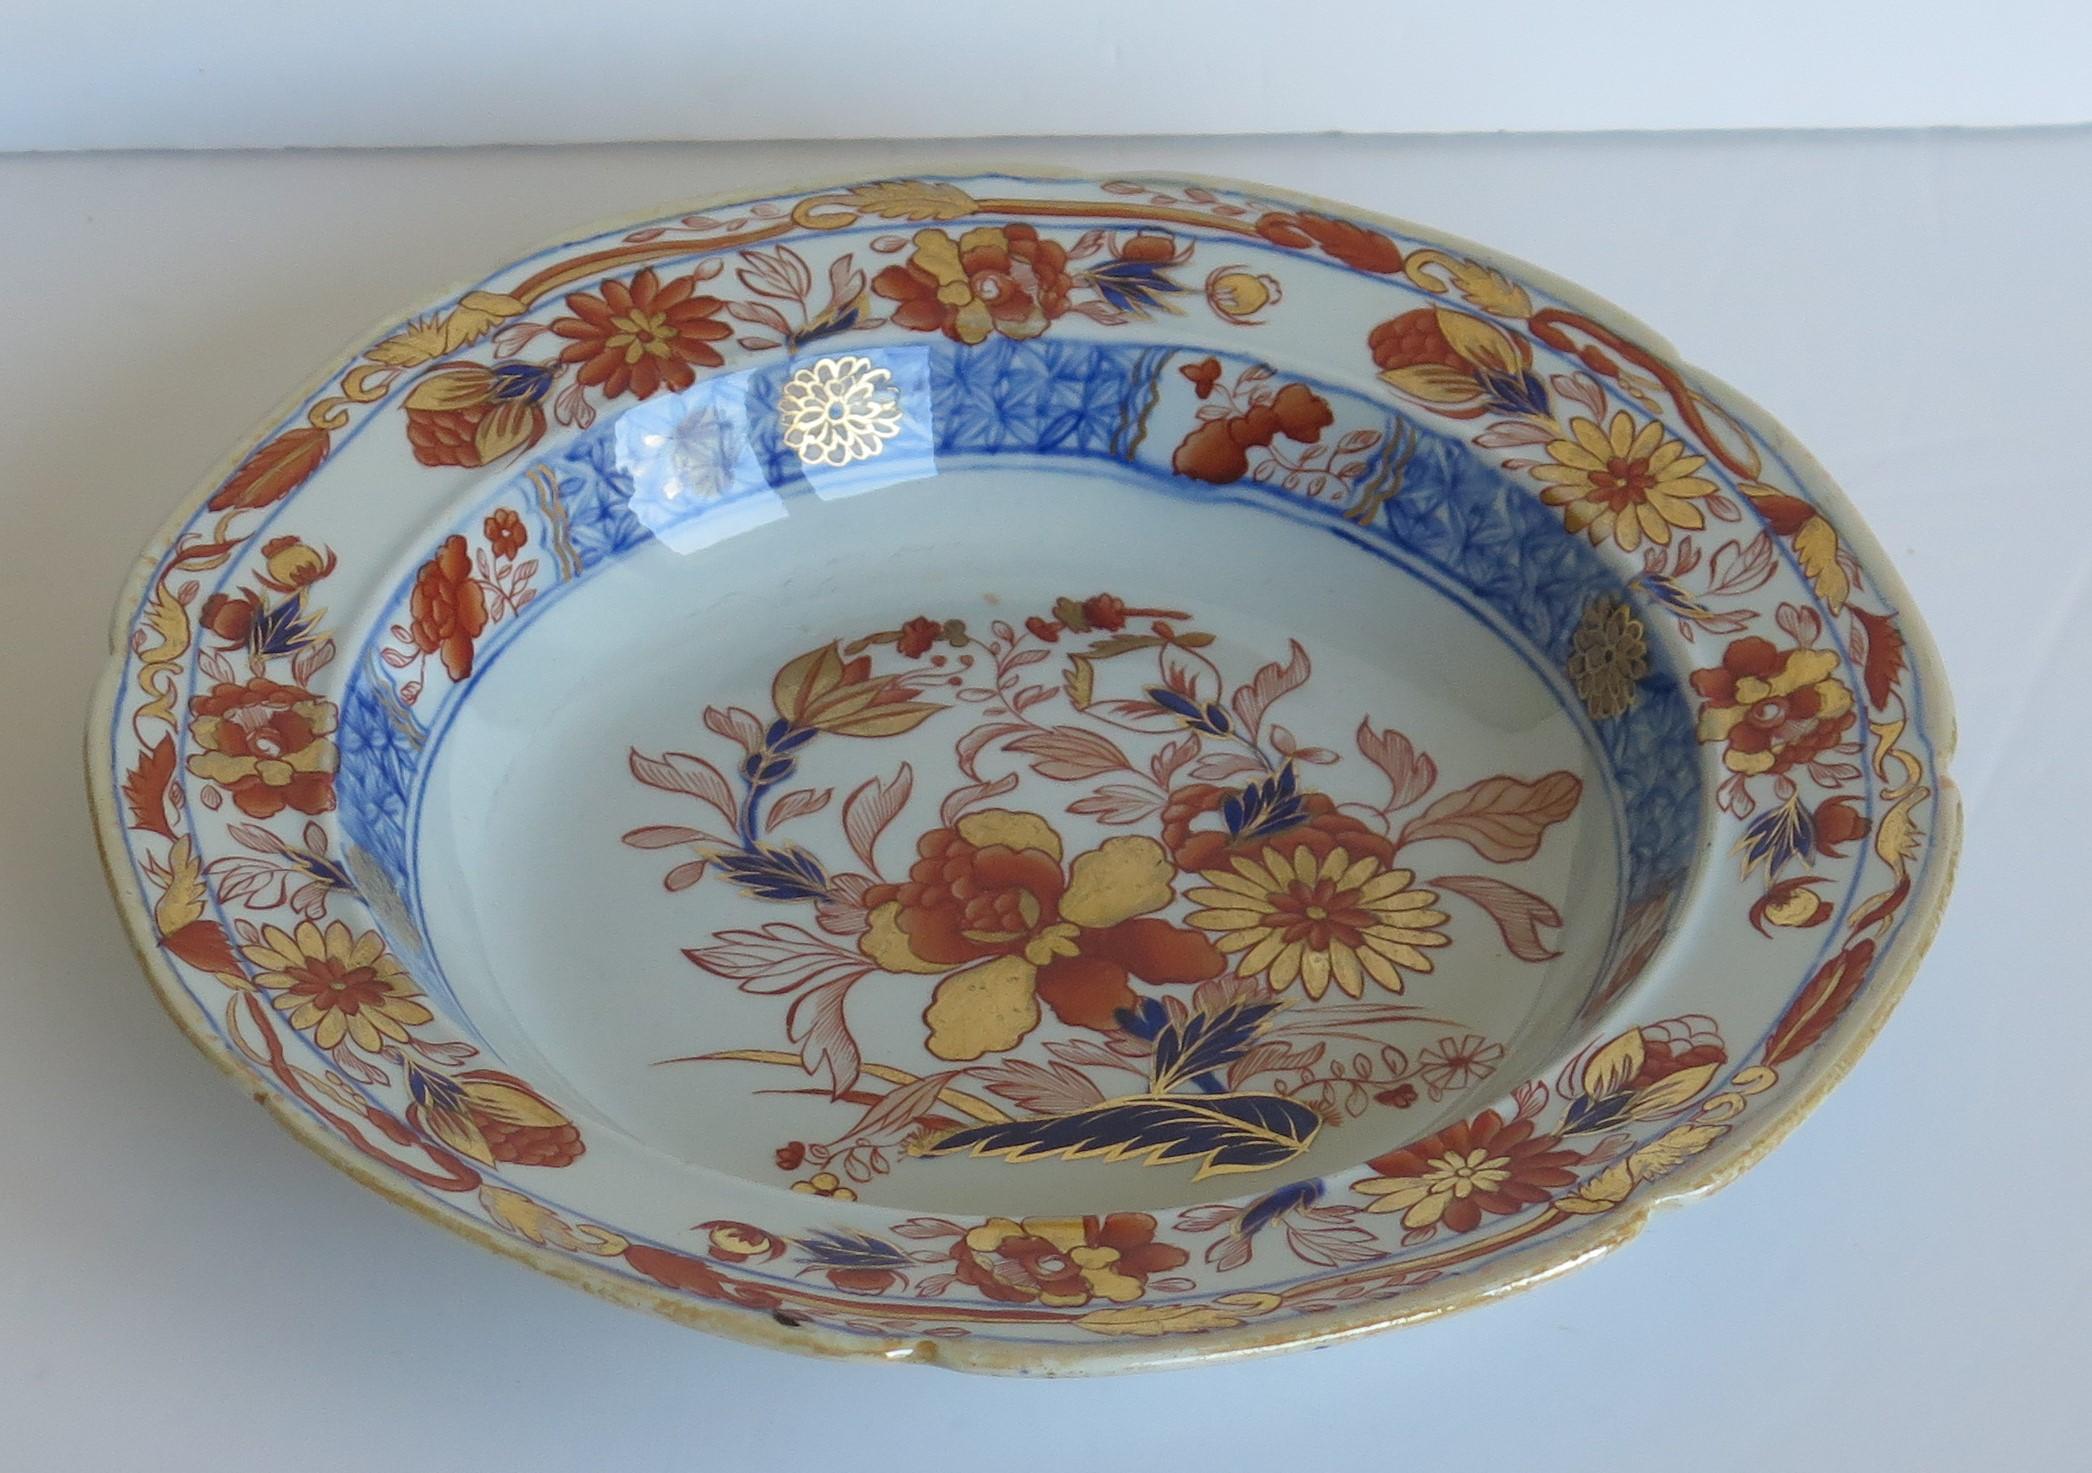 This is a fine Ironstone pottery soup bowl or deep plate made by the Mason's factory at Lane Delph, Staffordshire, England and beautifully decorated in the Gold Chrysanthemum Pattern, fully stamped and dating to the earliest period of Mason's